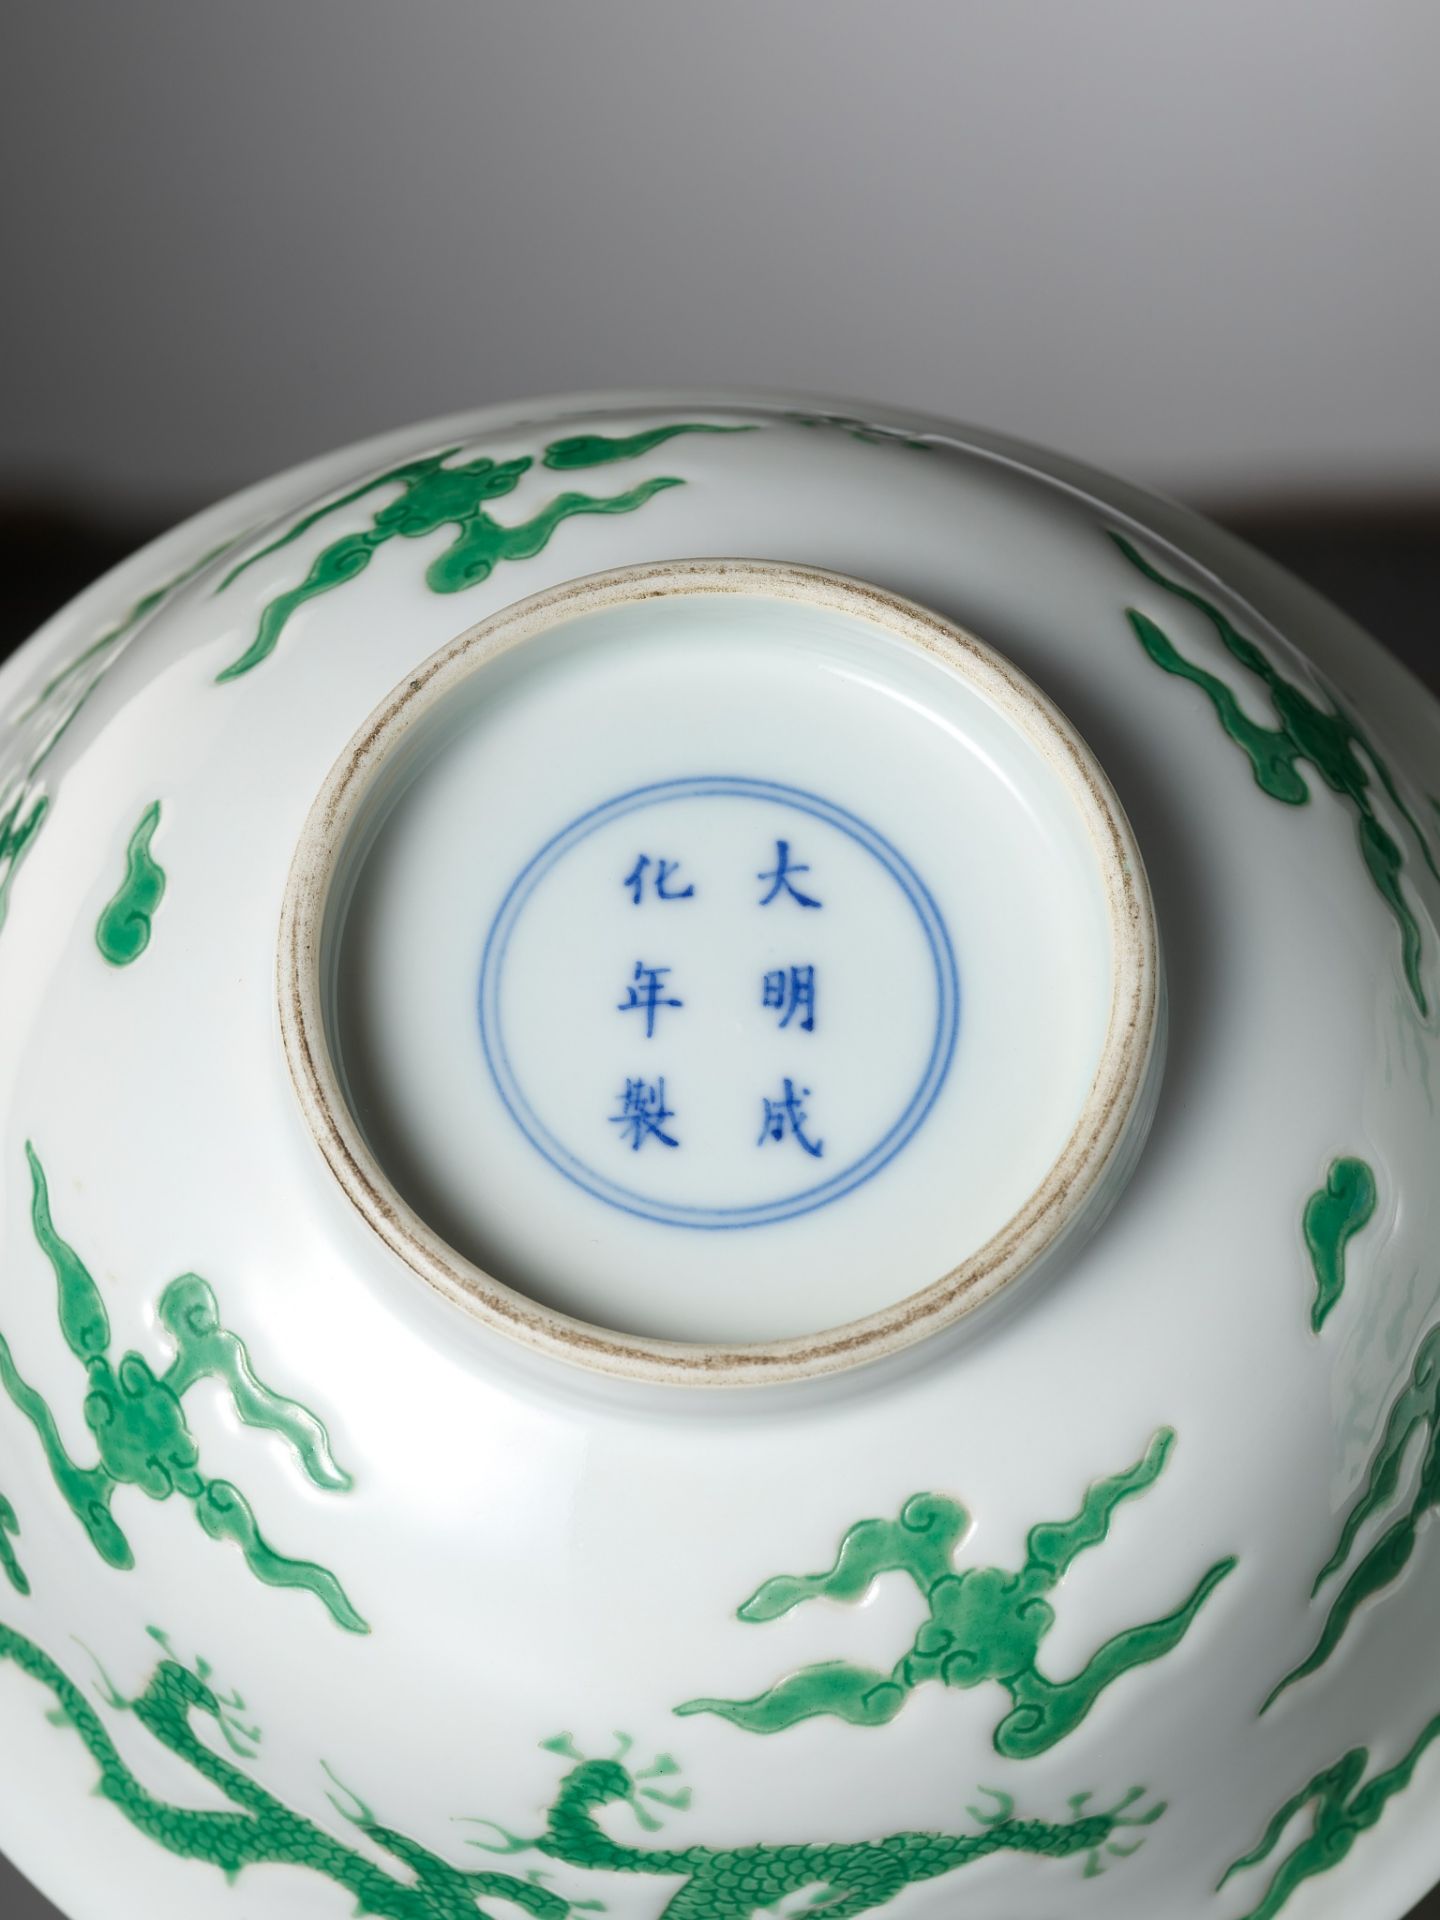 A RARE PAIR OF MING-STYLE GREEN-ENAMELED 'DRAGON' BOWLS, KANGXI PERIOD - Image 16 of 18